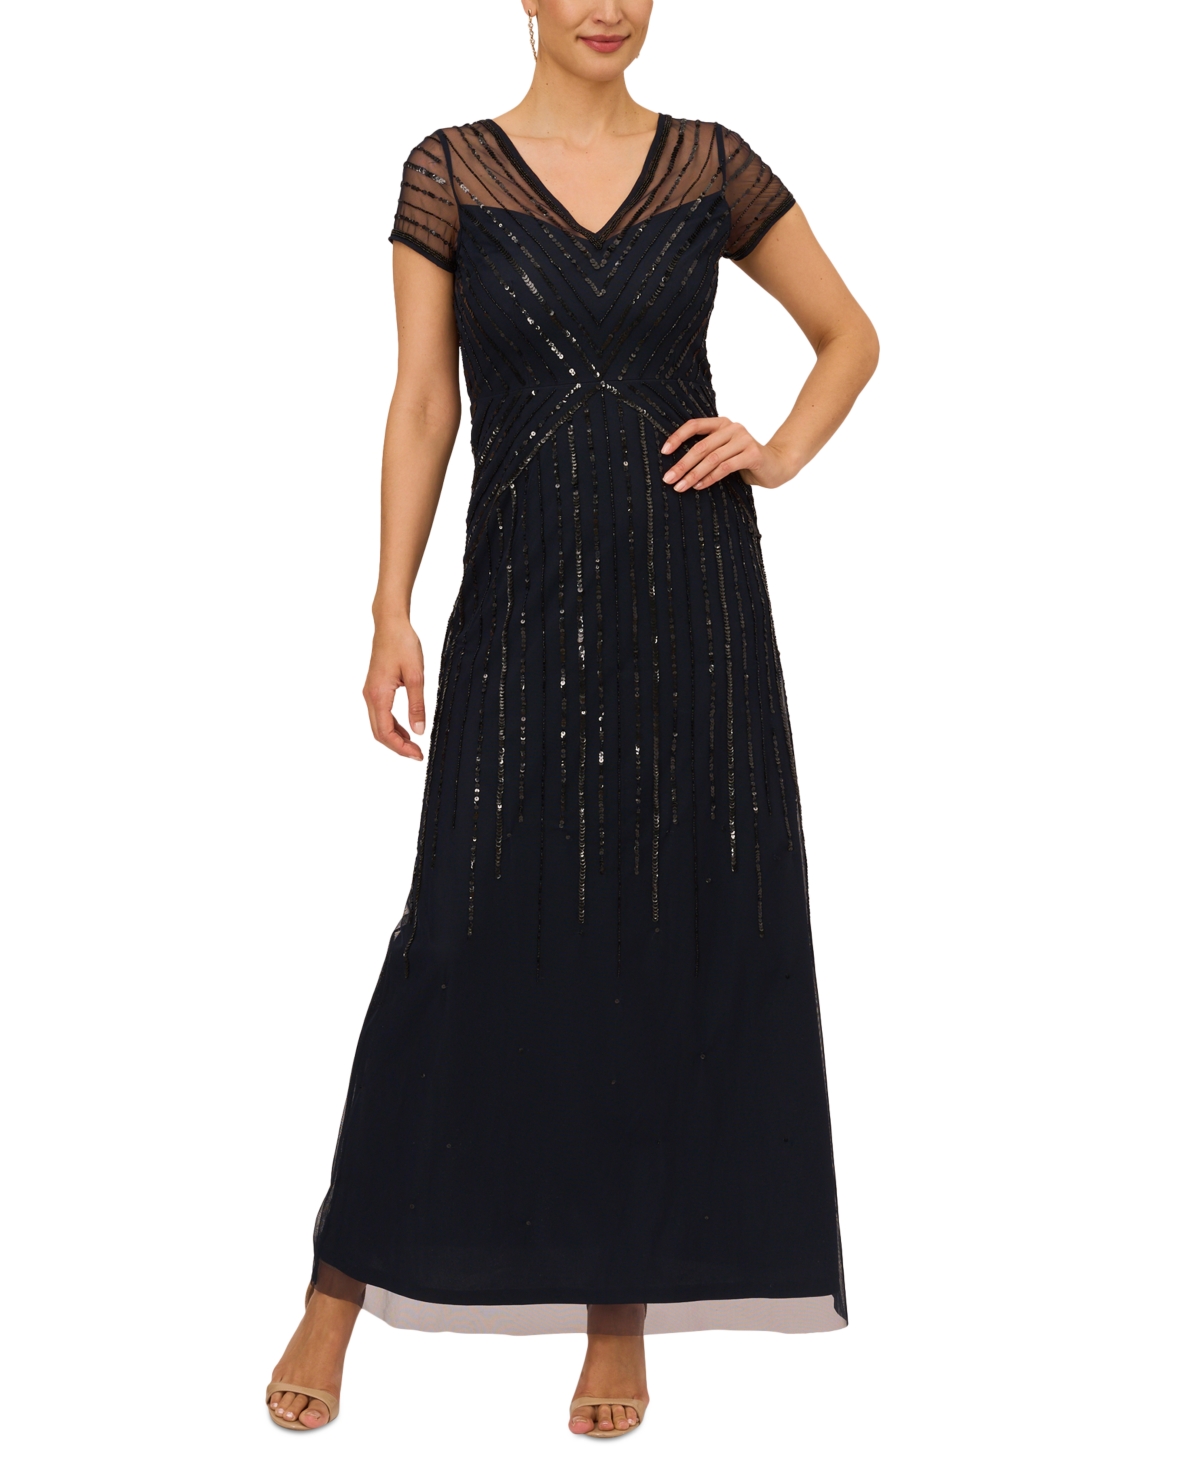 Best 1920s Prom Dresses – Great Gatsby Style Gowns Papell Studio Womens V-Neck Short-Sleeve Sequin Gown - MidnightBlack $159.00 AT vintagedancer.com